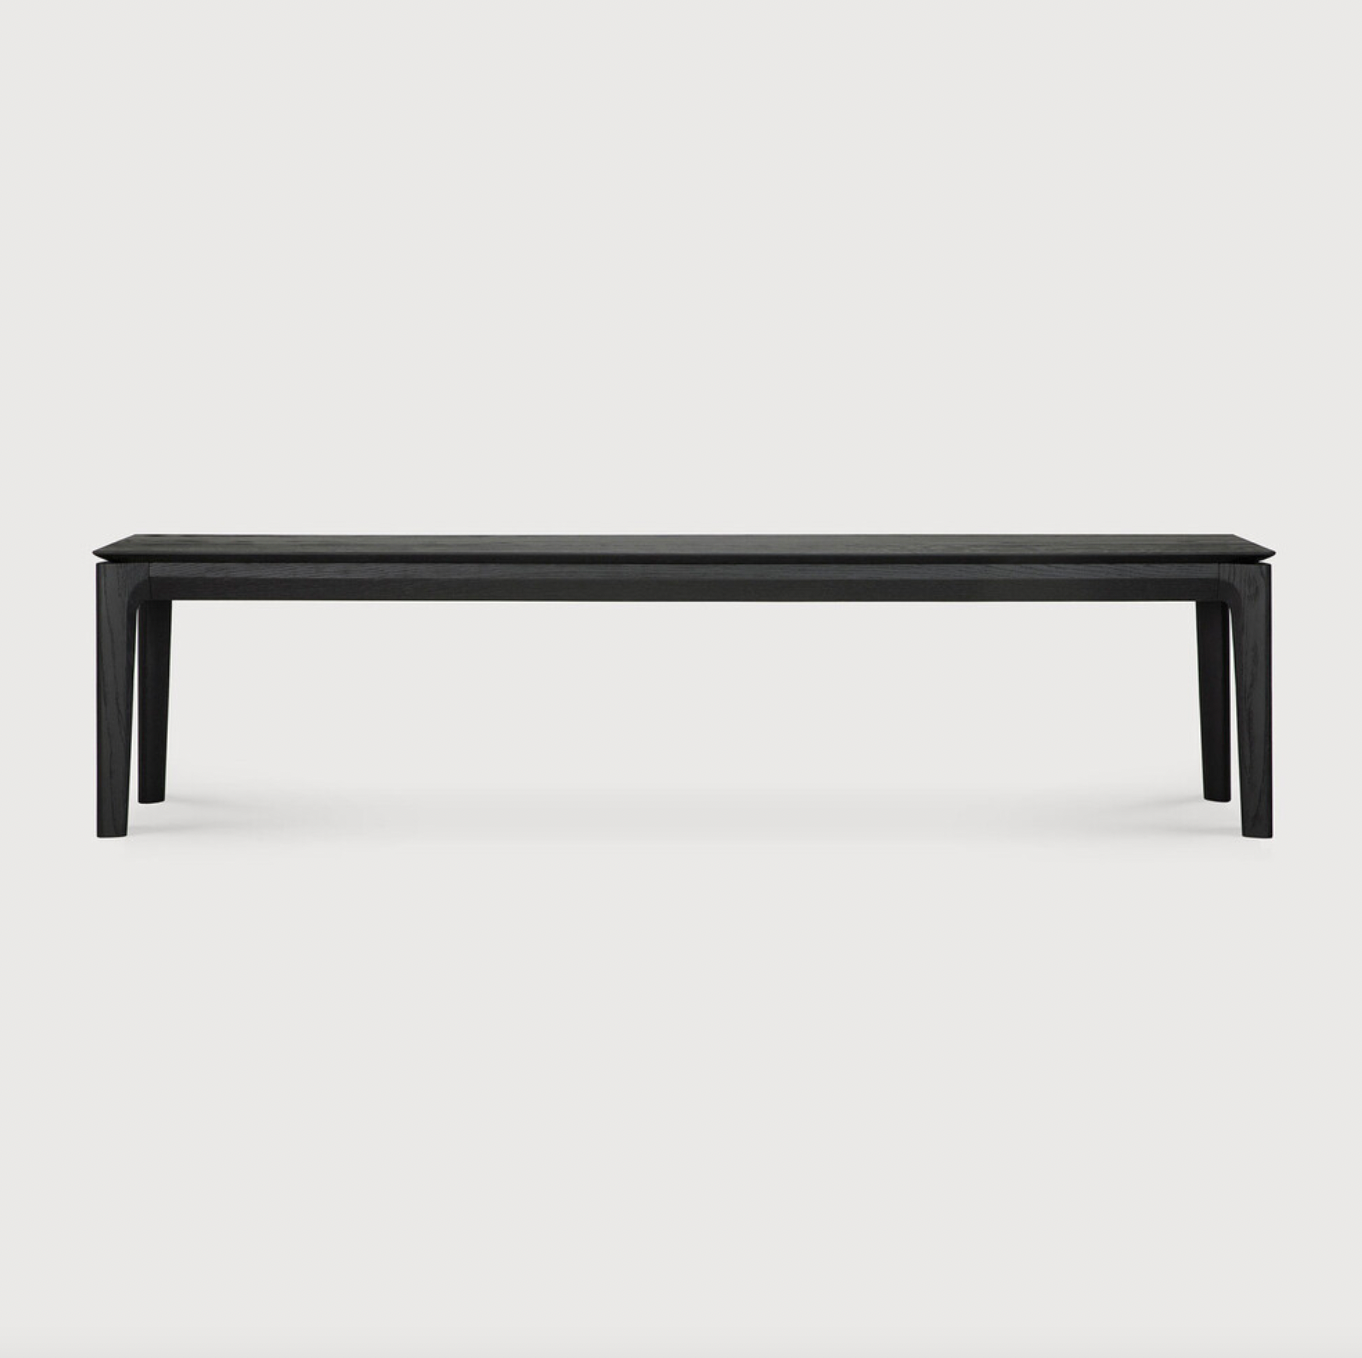 This Oak Bok Bench - Black features an airy shape with rock-solid construction,  making this piece a timeless and remarkable design to enjoy for years to come. Pair with a dining table or stand-alone against a wall, hallway, or end of the bed!  Material: Oak Finish: Oiled